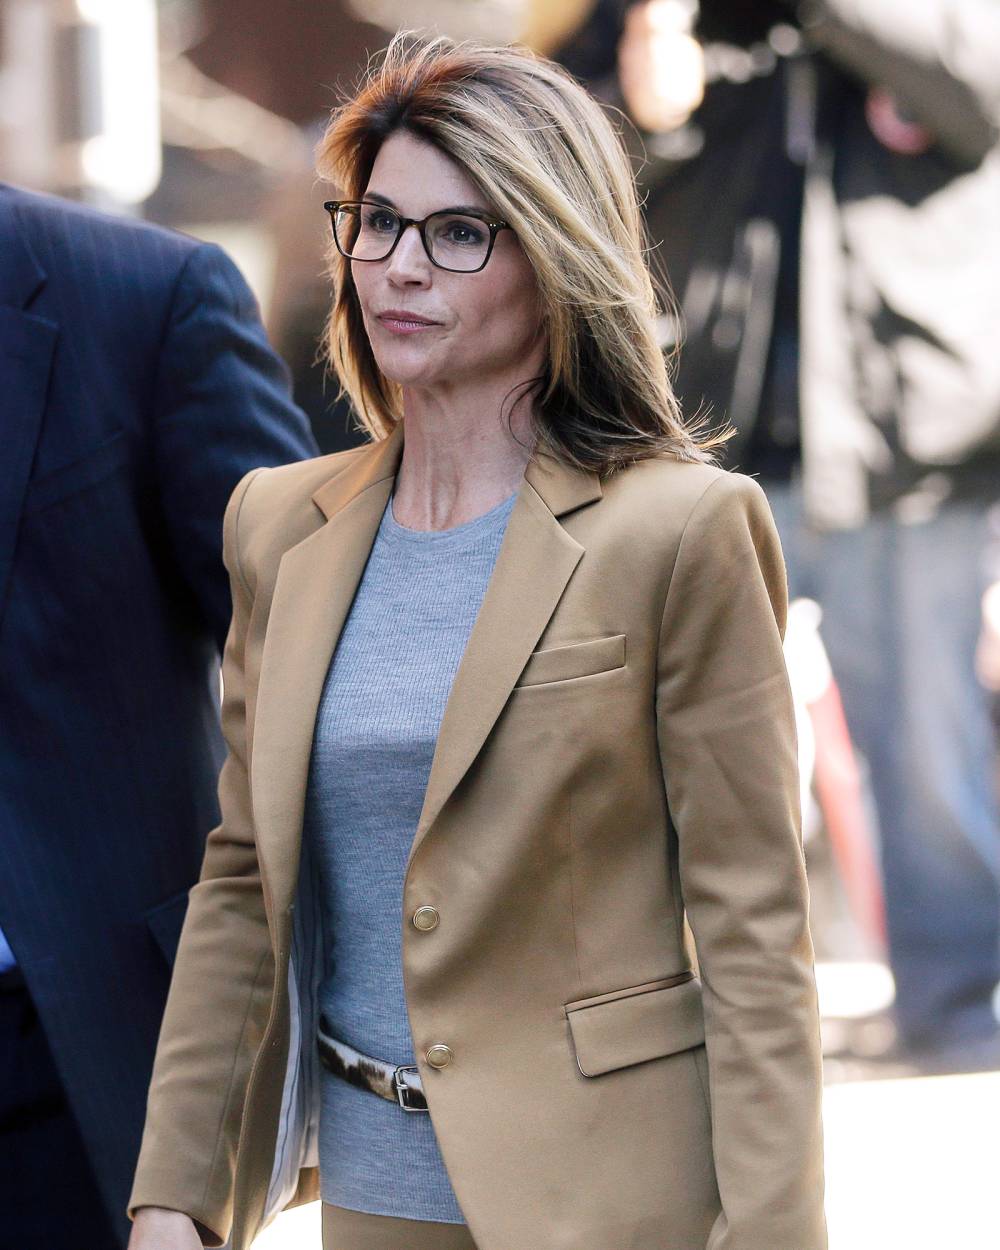 Lori Loughlin's Prosecutor Is 'Grilling Her' in Mock Trials Ahead of Court Appearance